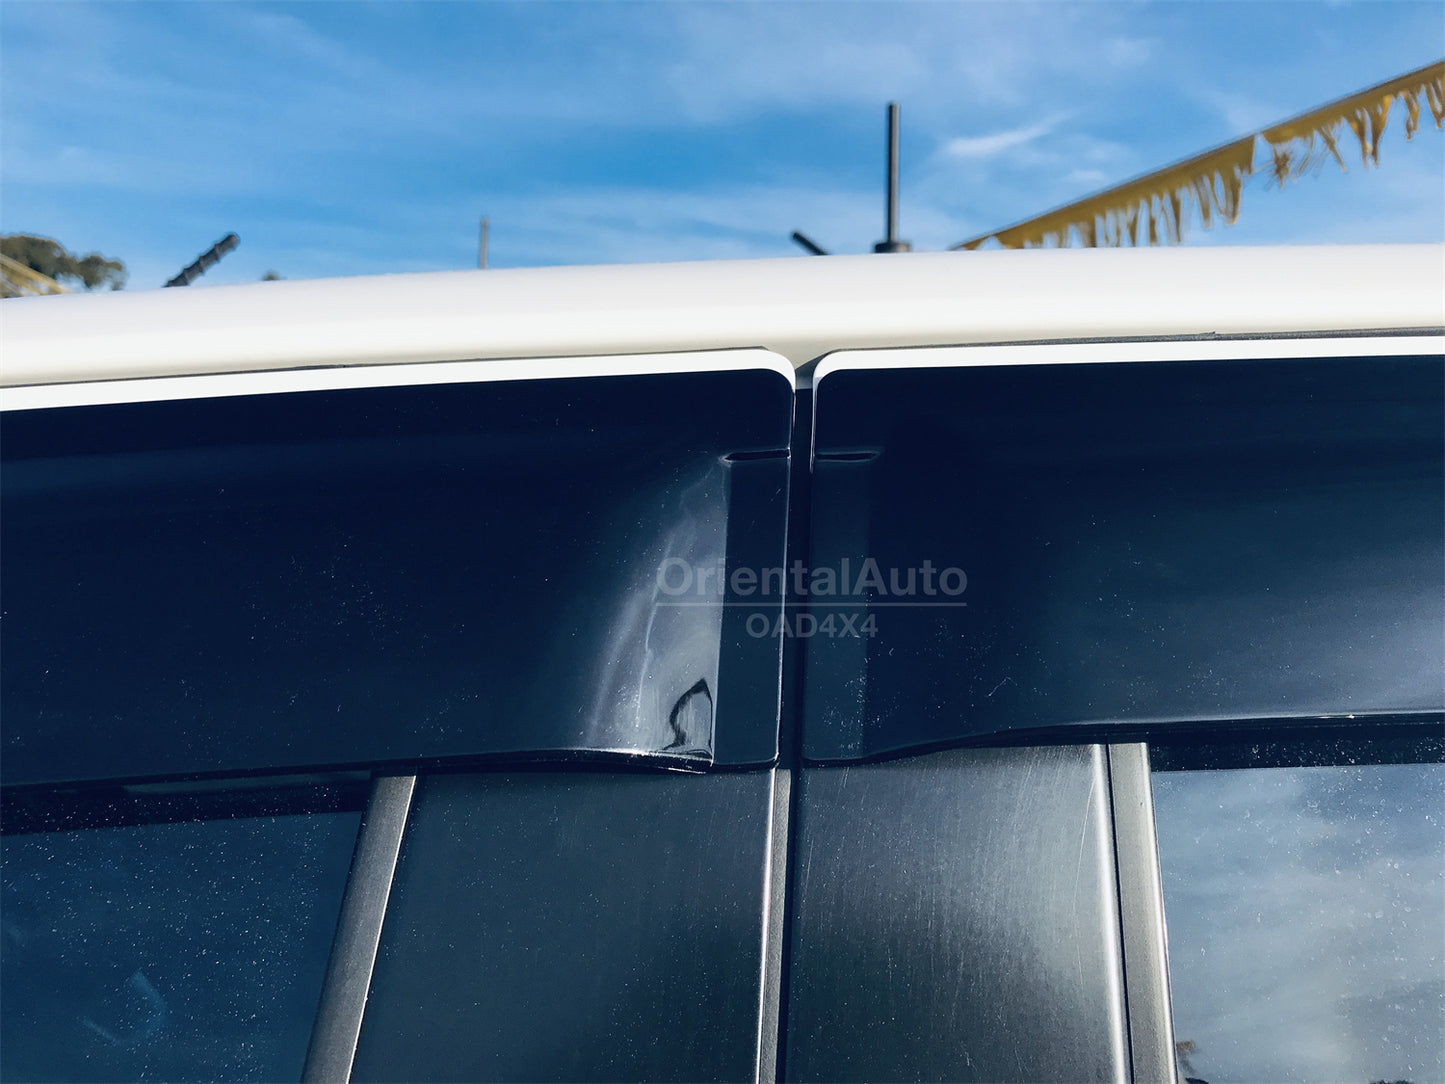 Pre-order Injection Weather Shields for Toyota Hilux Dual Cab 2015+ Weathershields Window Visors